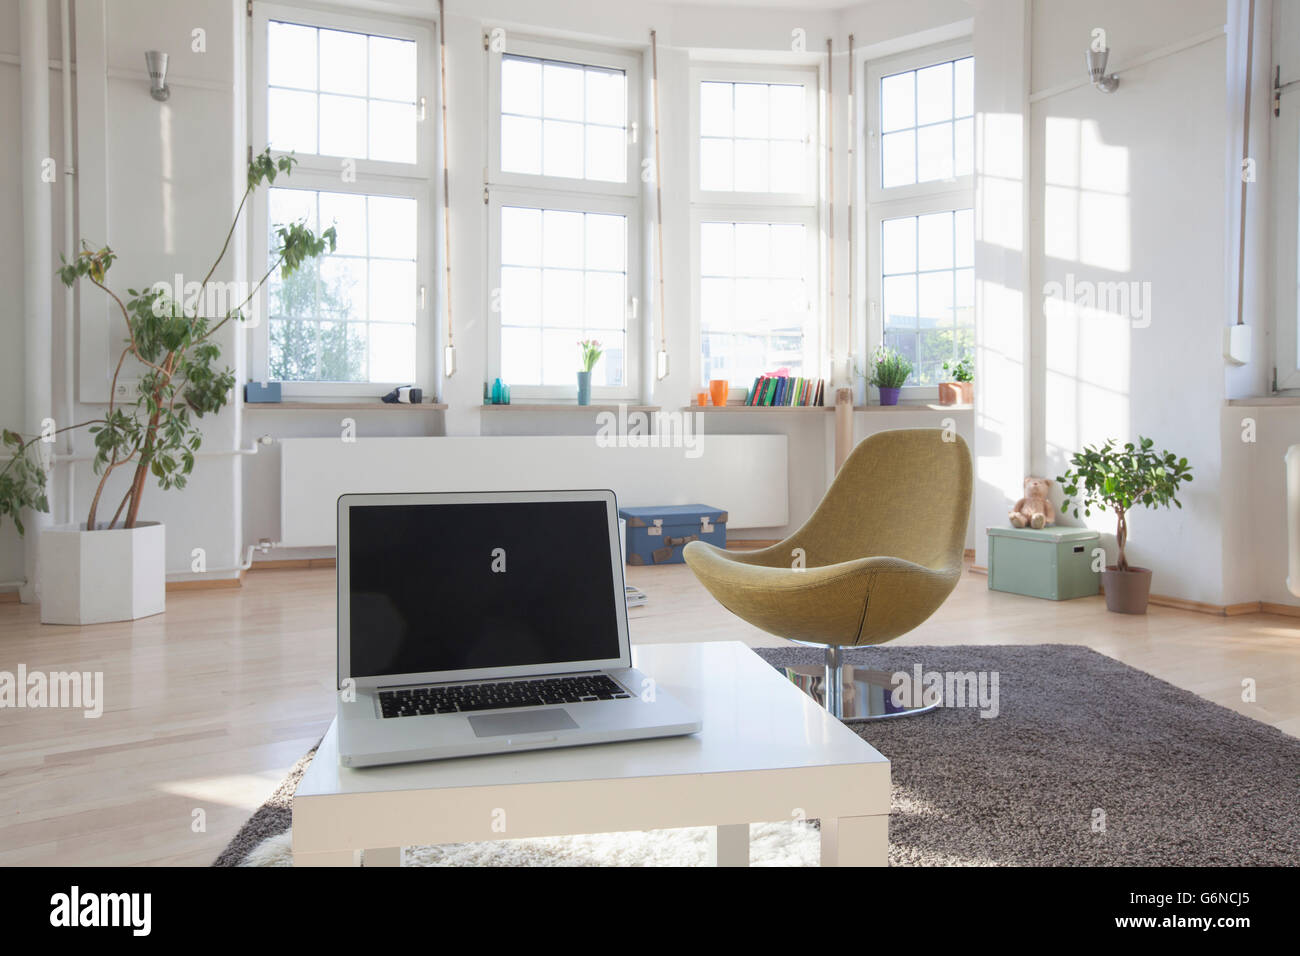 Home interior with laptop and chair Stock Photo